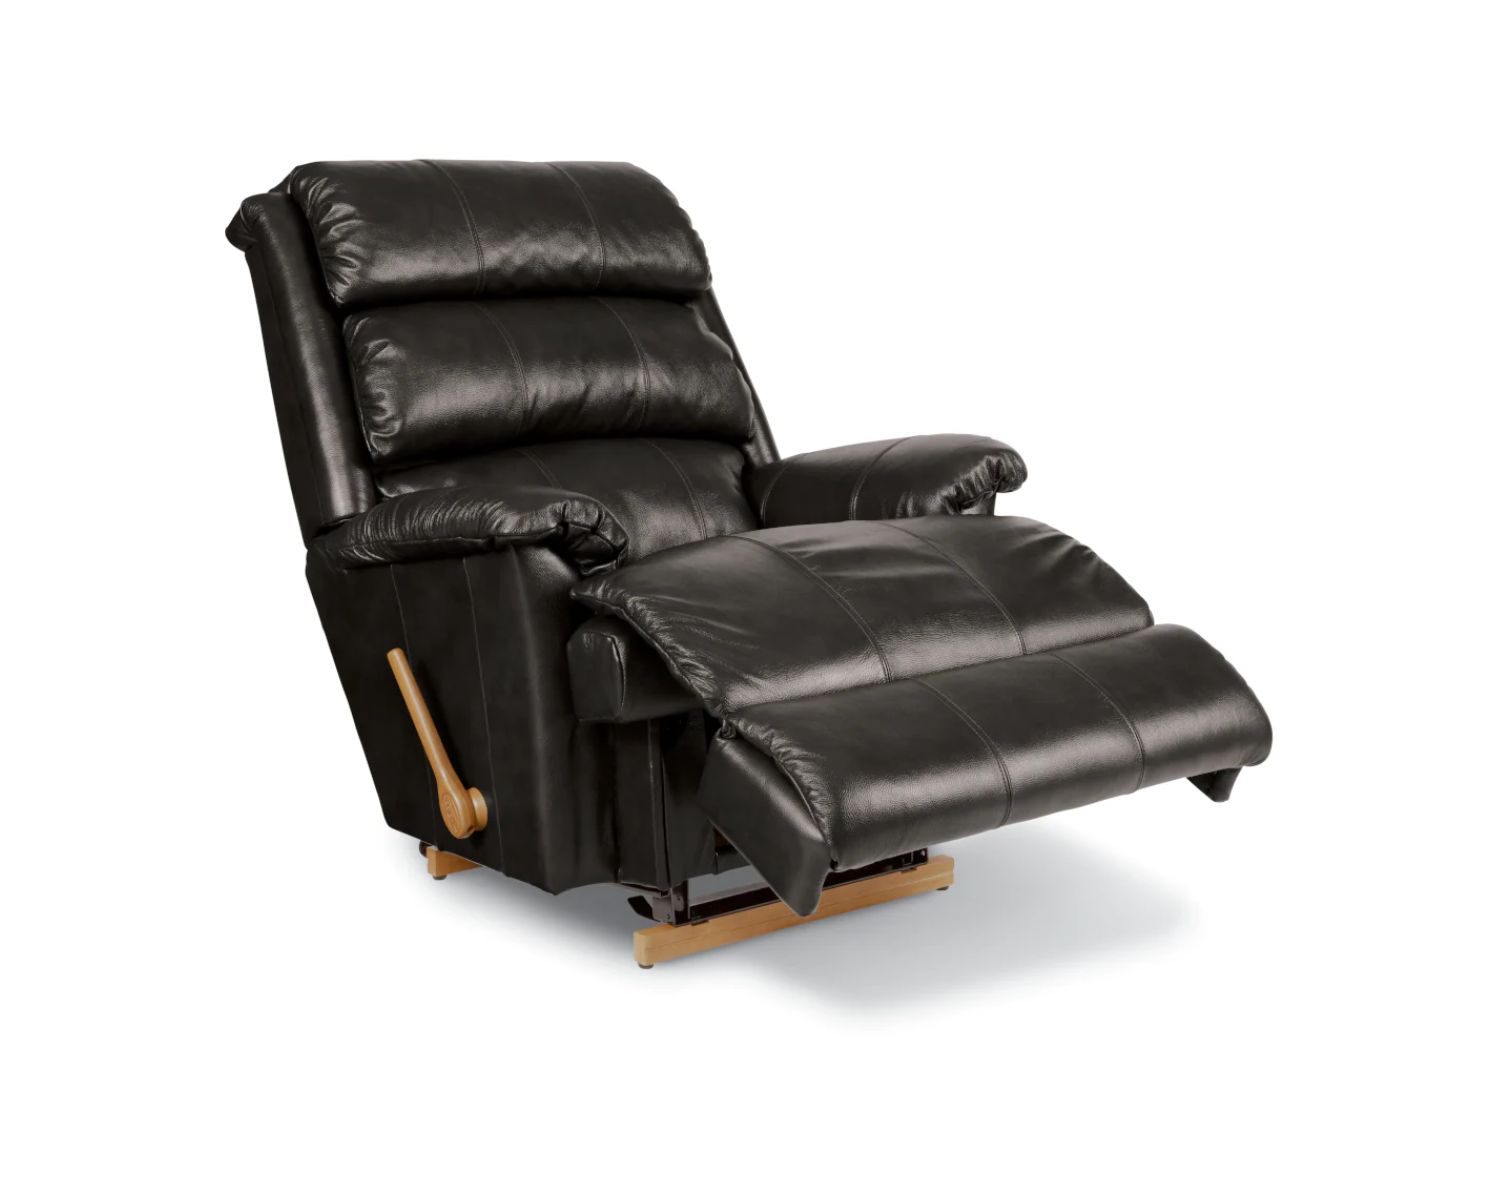 How To Adjust A Recliner